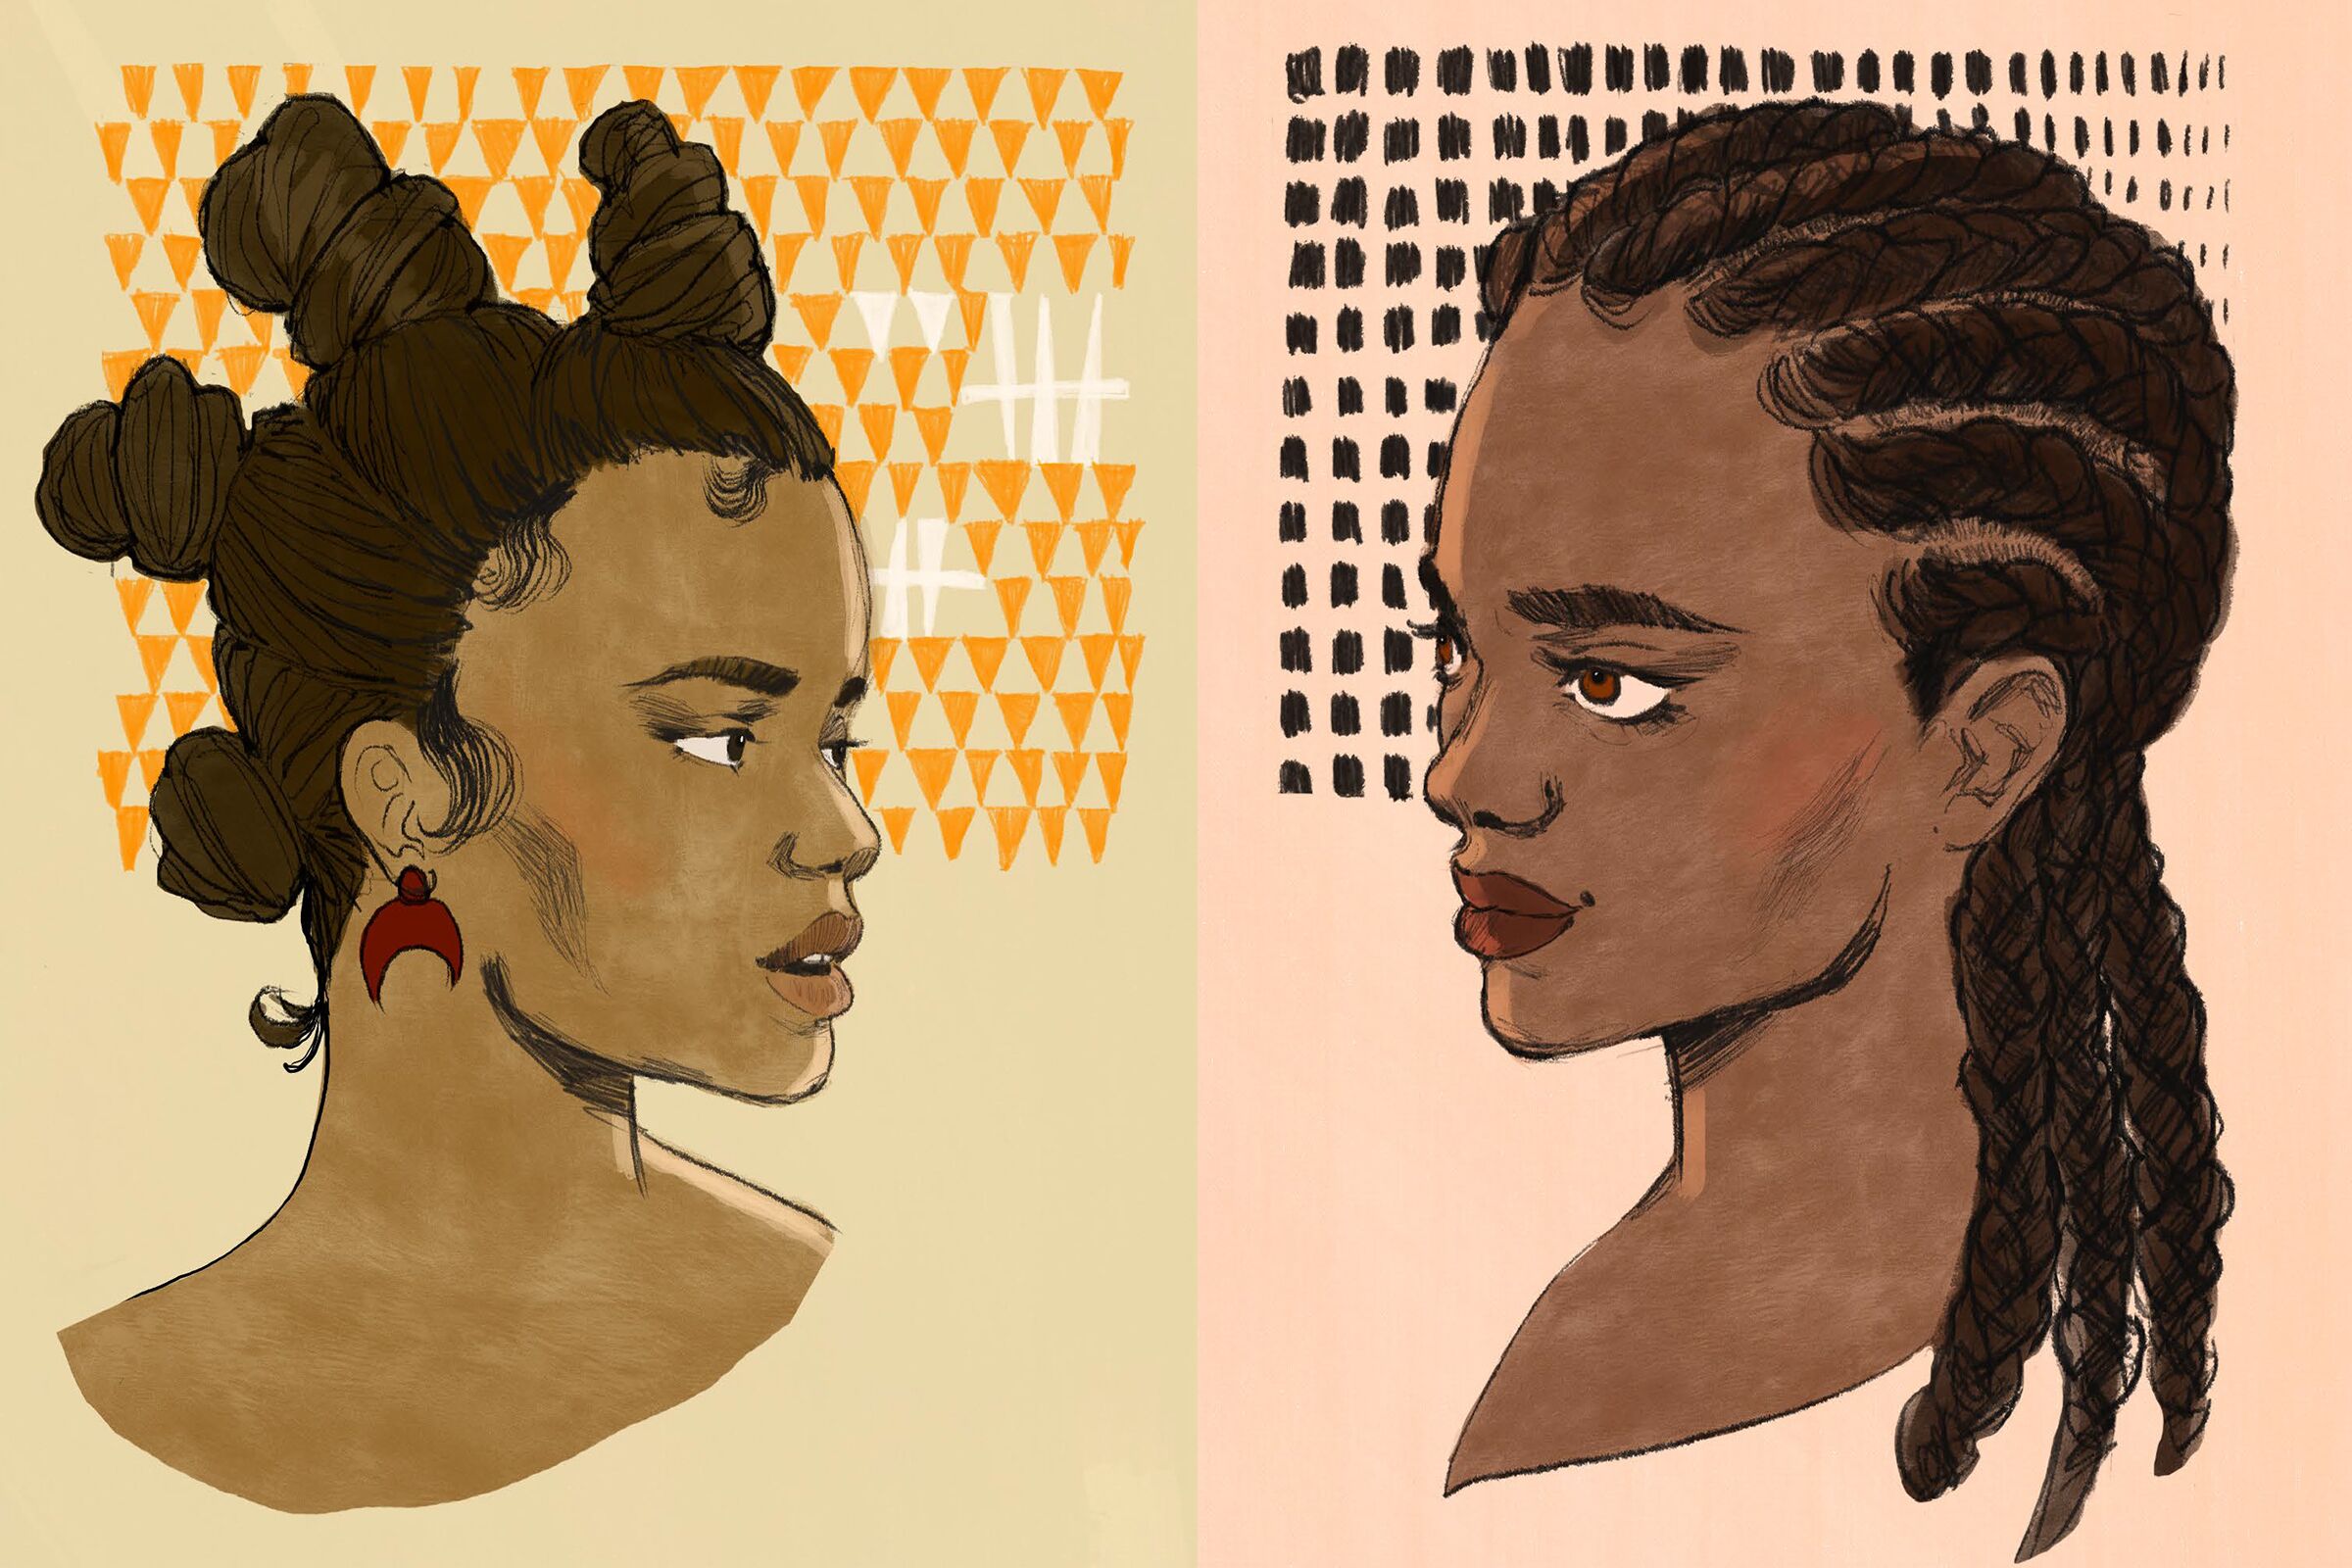 Two black women facing each other. The first has bantu knots and the second has corn rows and braids.